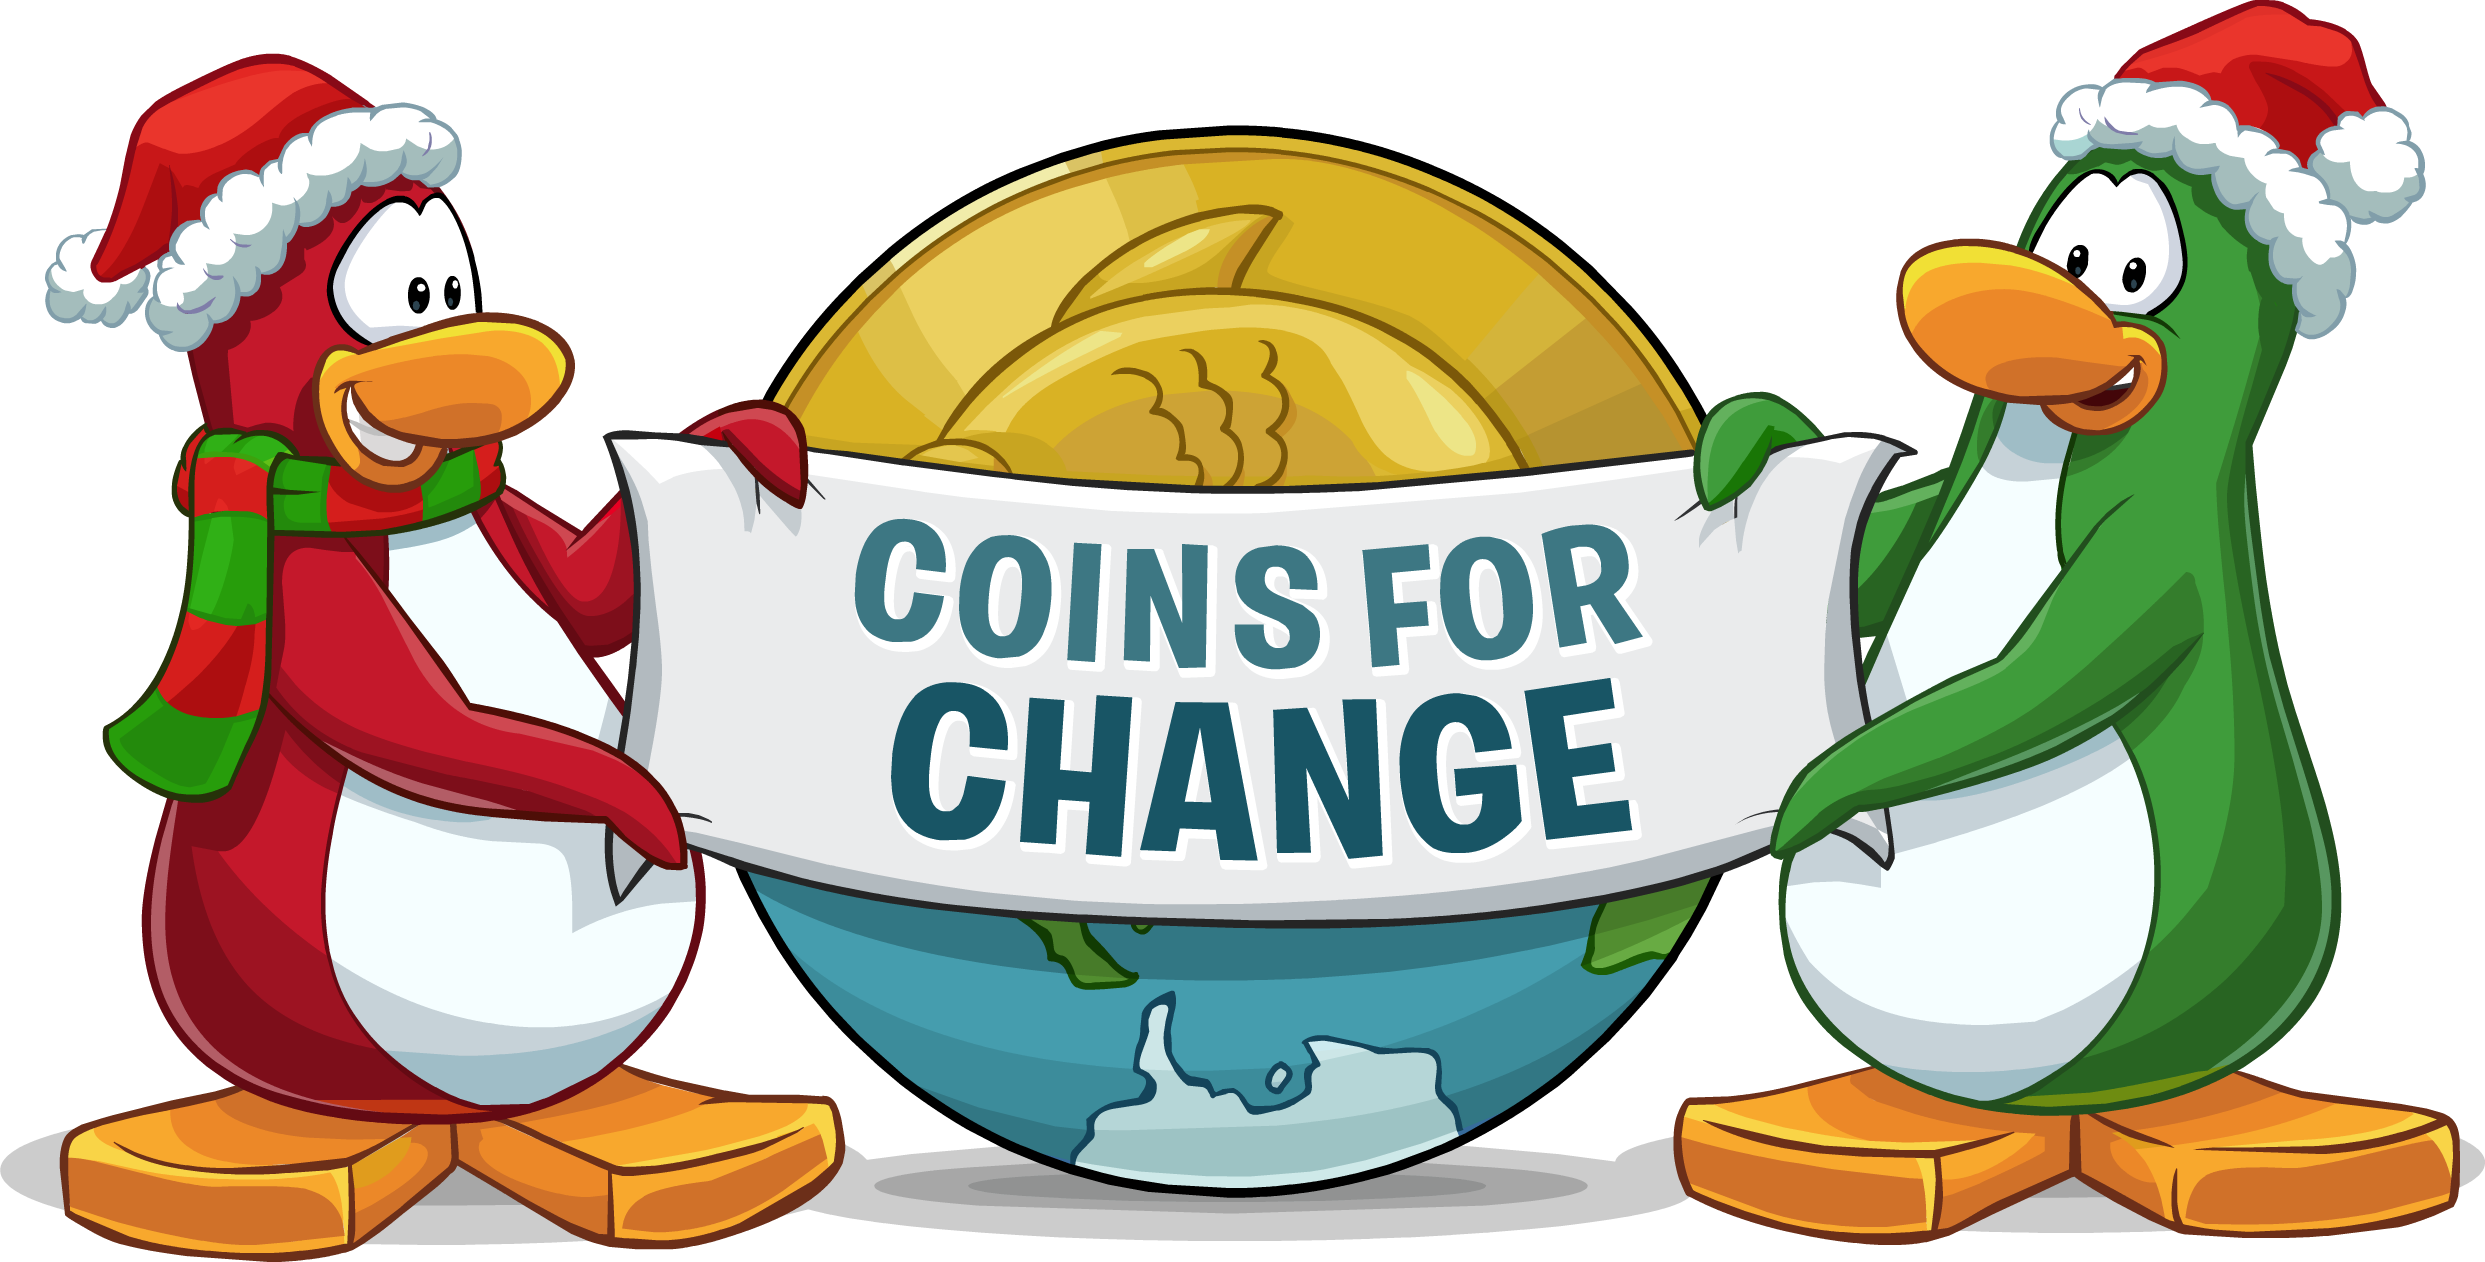 Club Penguin Holiday Party 2014 And "we Wish You A - Club Penguin Coins For Change (2485x1262)